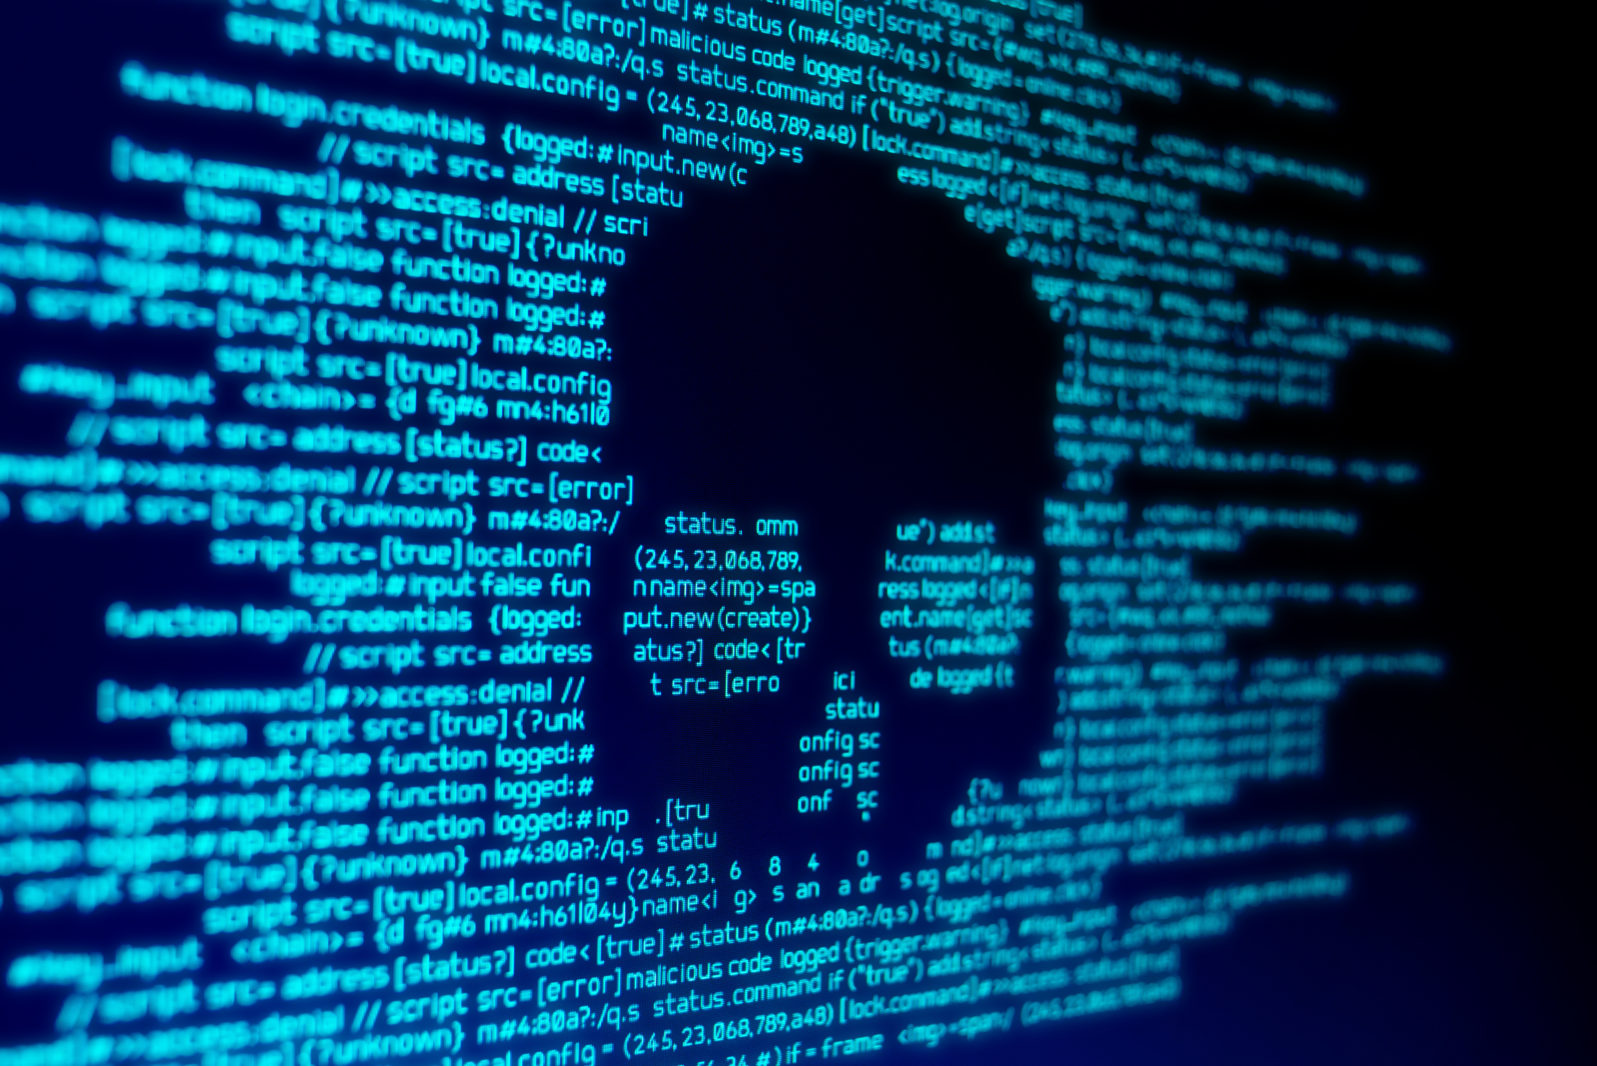 Computer code on a screen with a skull representing a computer virus / malware attack.